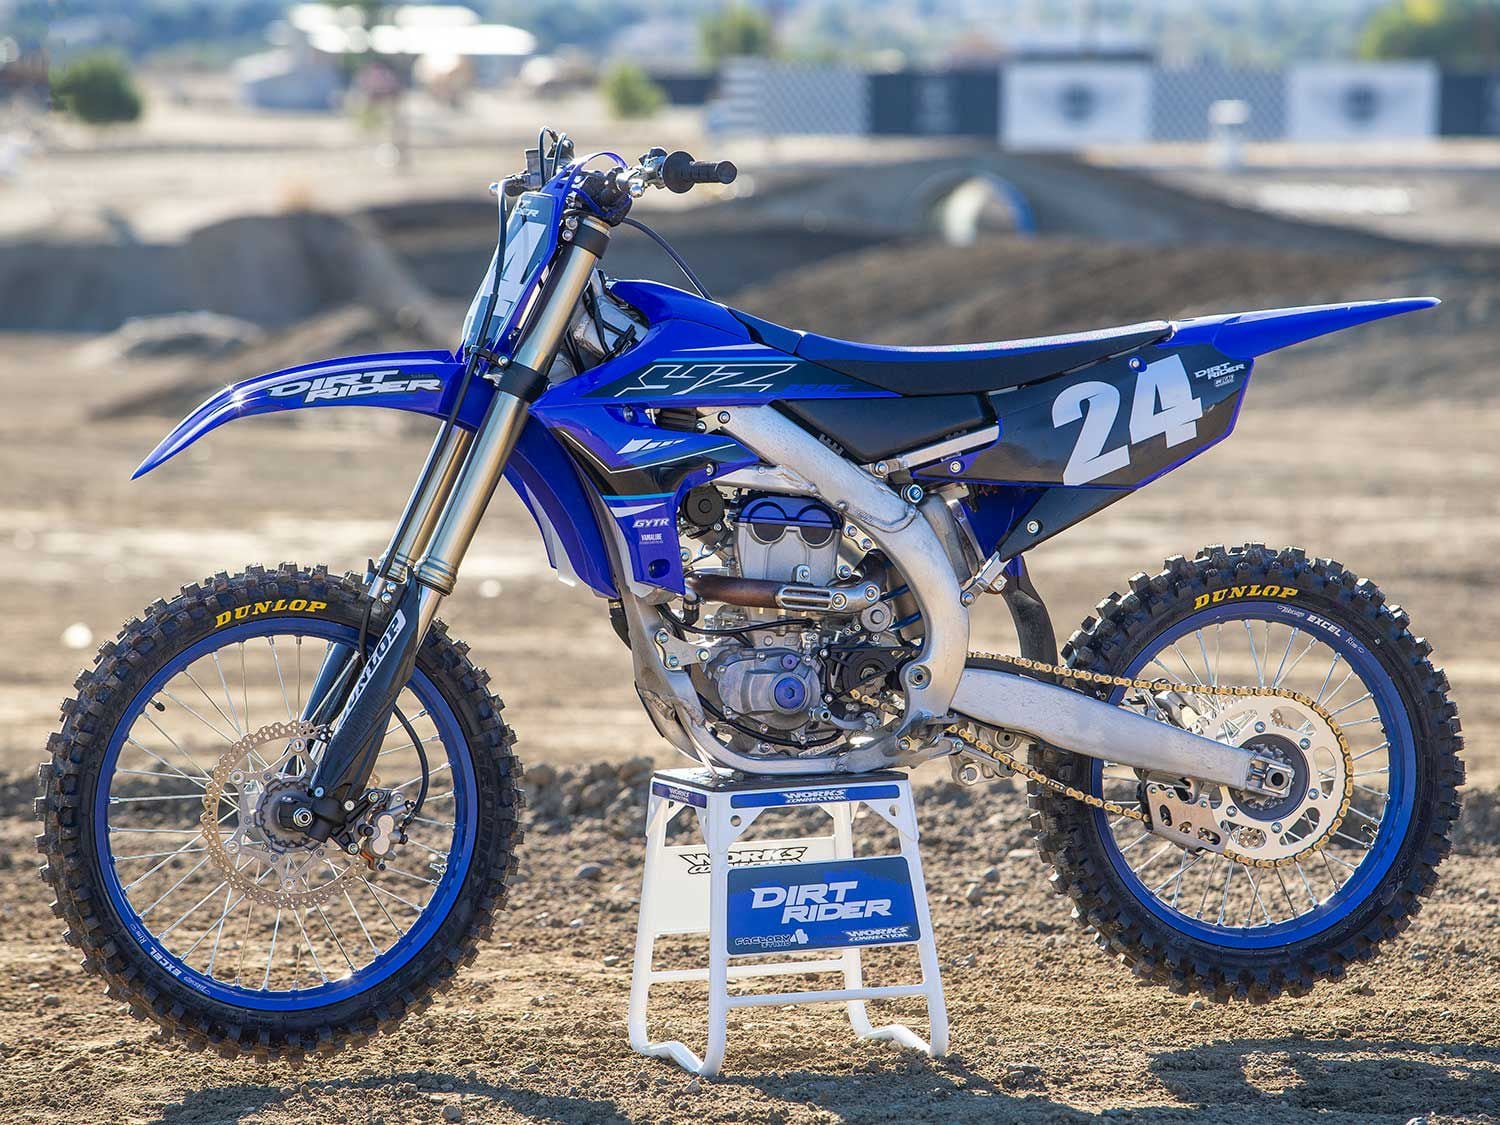 At 235 pounds the YZ250F hits in the middle of the spectrum of the five bikes in terms of wet weight.